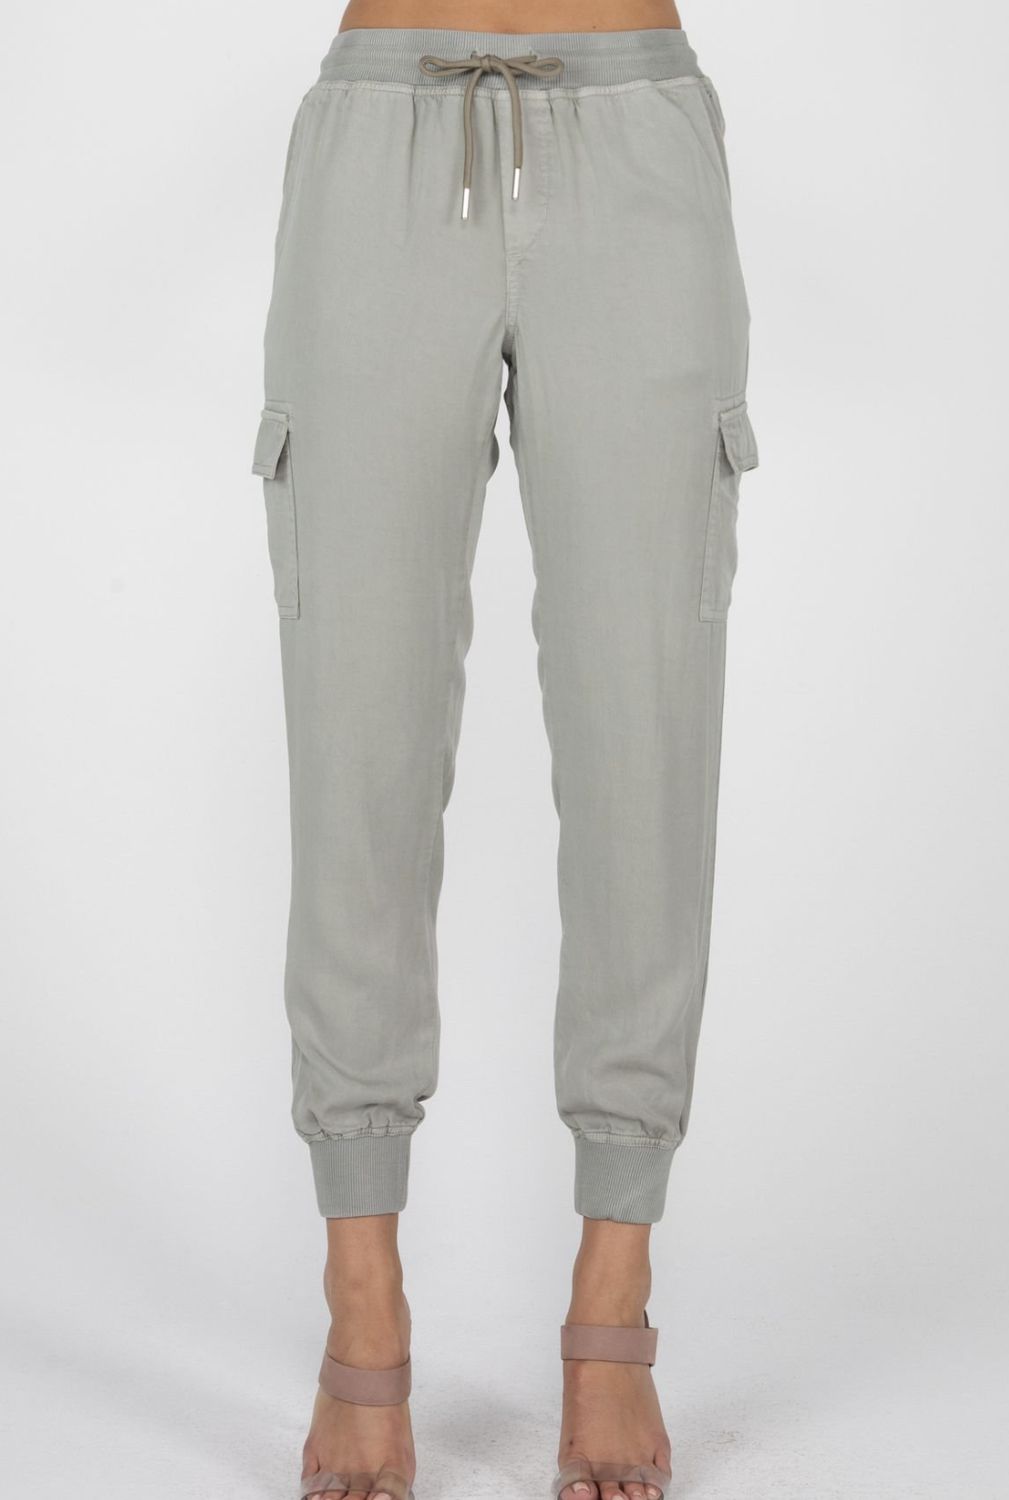 Ellie Joggers, Size: Extra Small